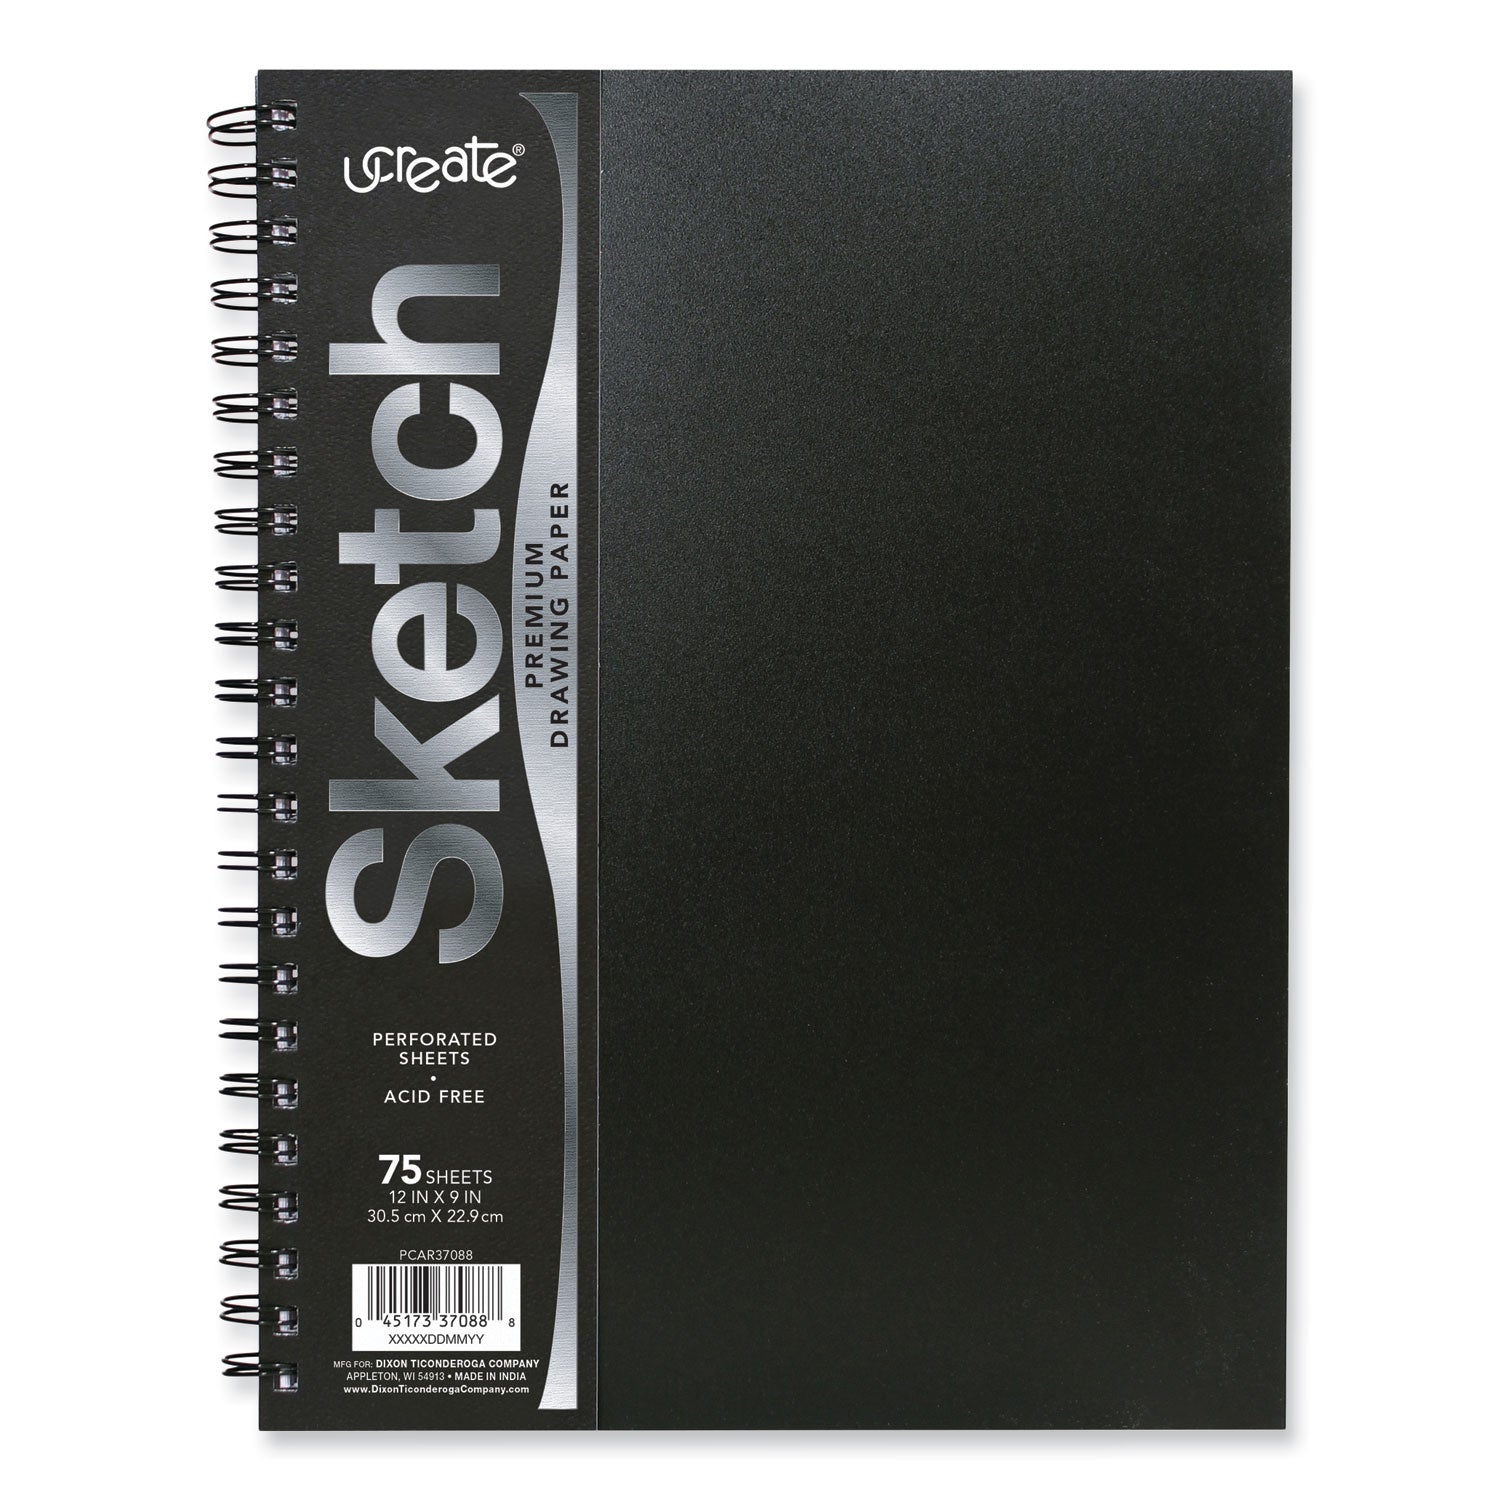 ucreate-poly-cover-sketch-book-43-lb-cover-paper-stock-black-cover-75-sheets-per-book-12-x-9-sheets_pacpcar37088 - 1